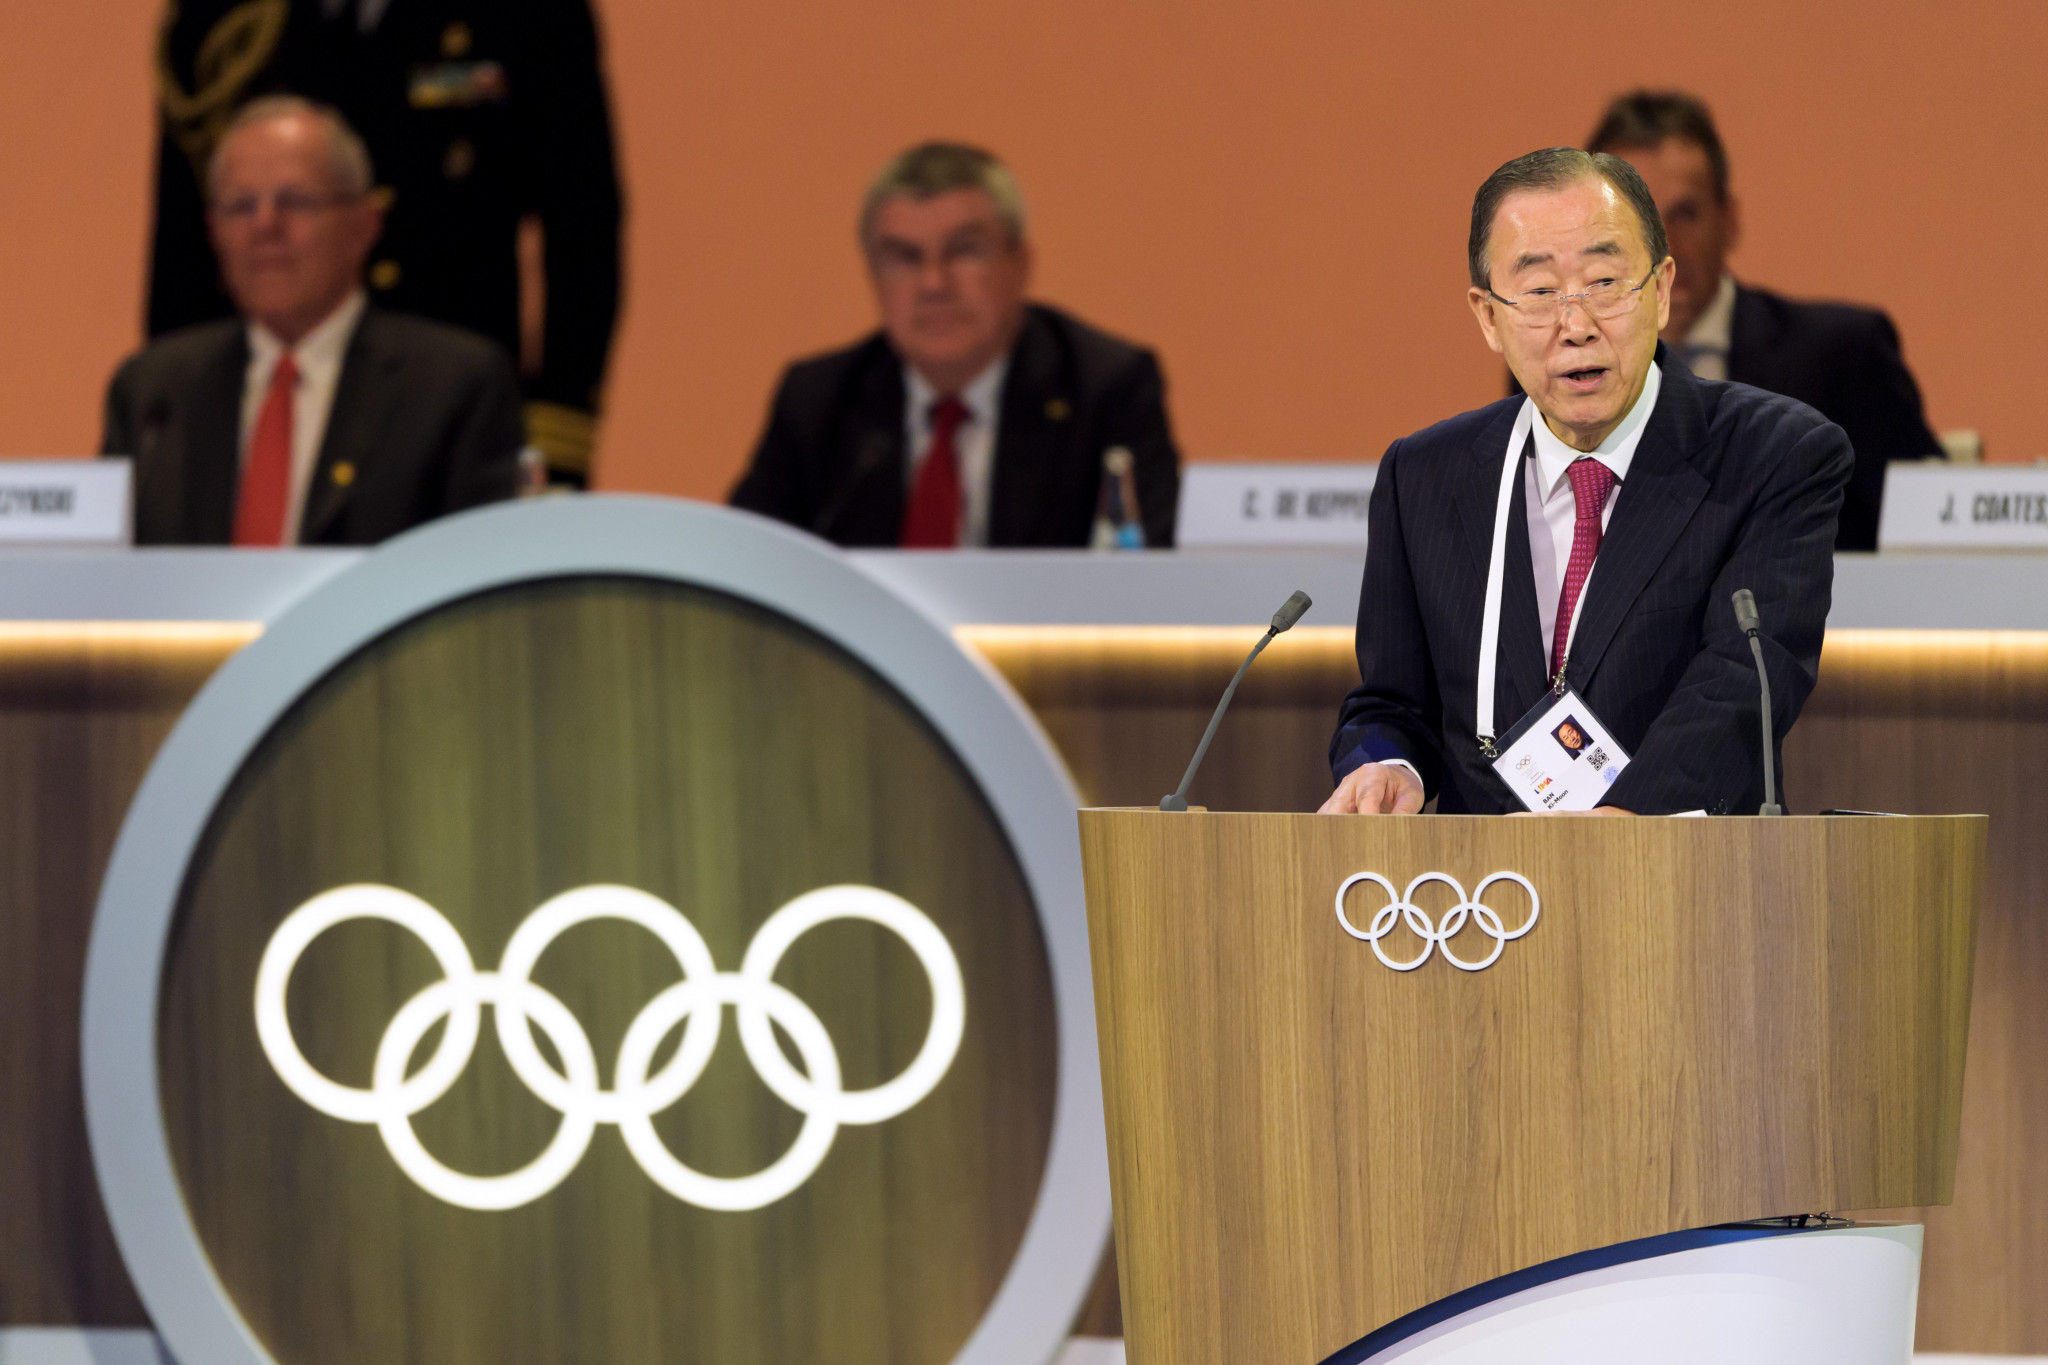 Ban Ki-moon chaired a first meeting of the IOC Ethics Commission today in Lausanne ©Getty Images